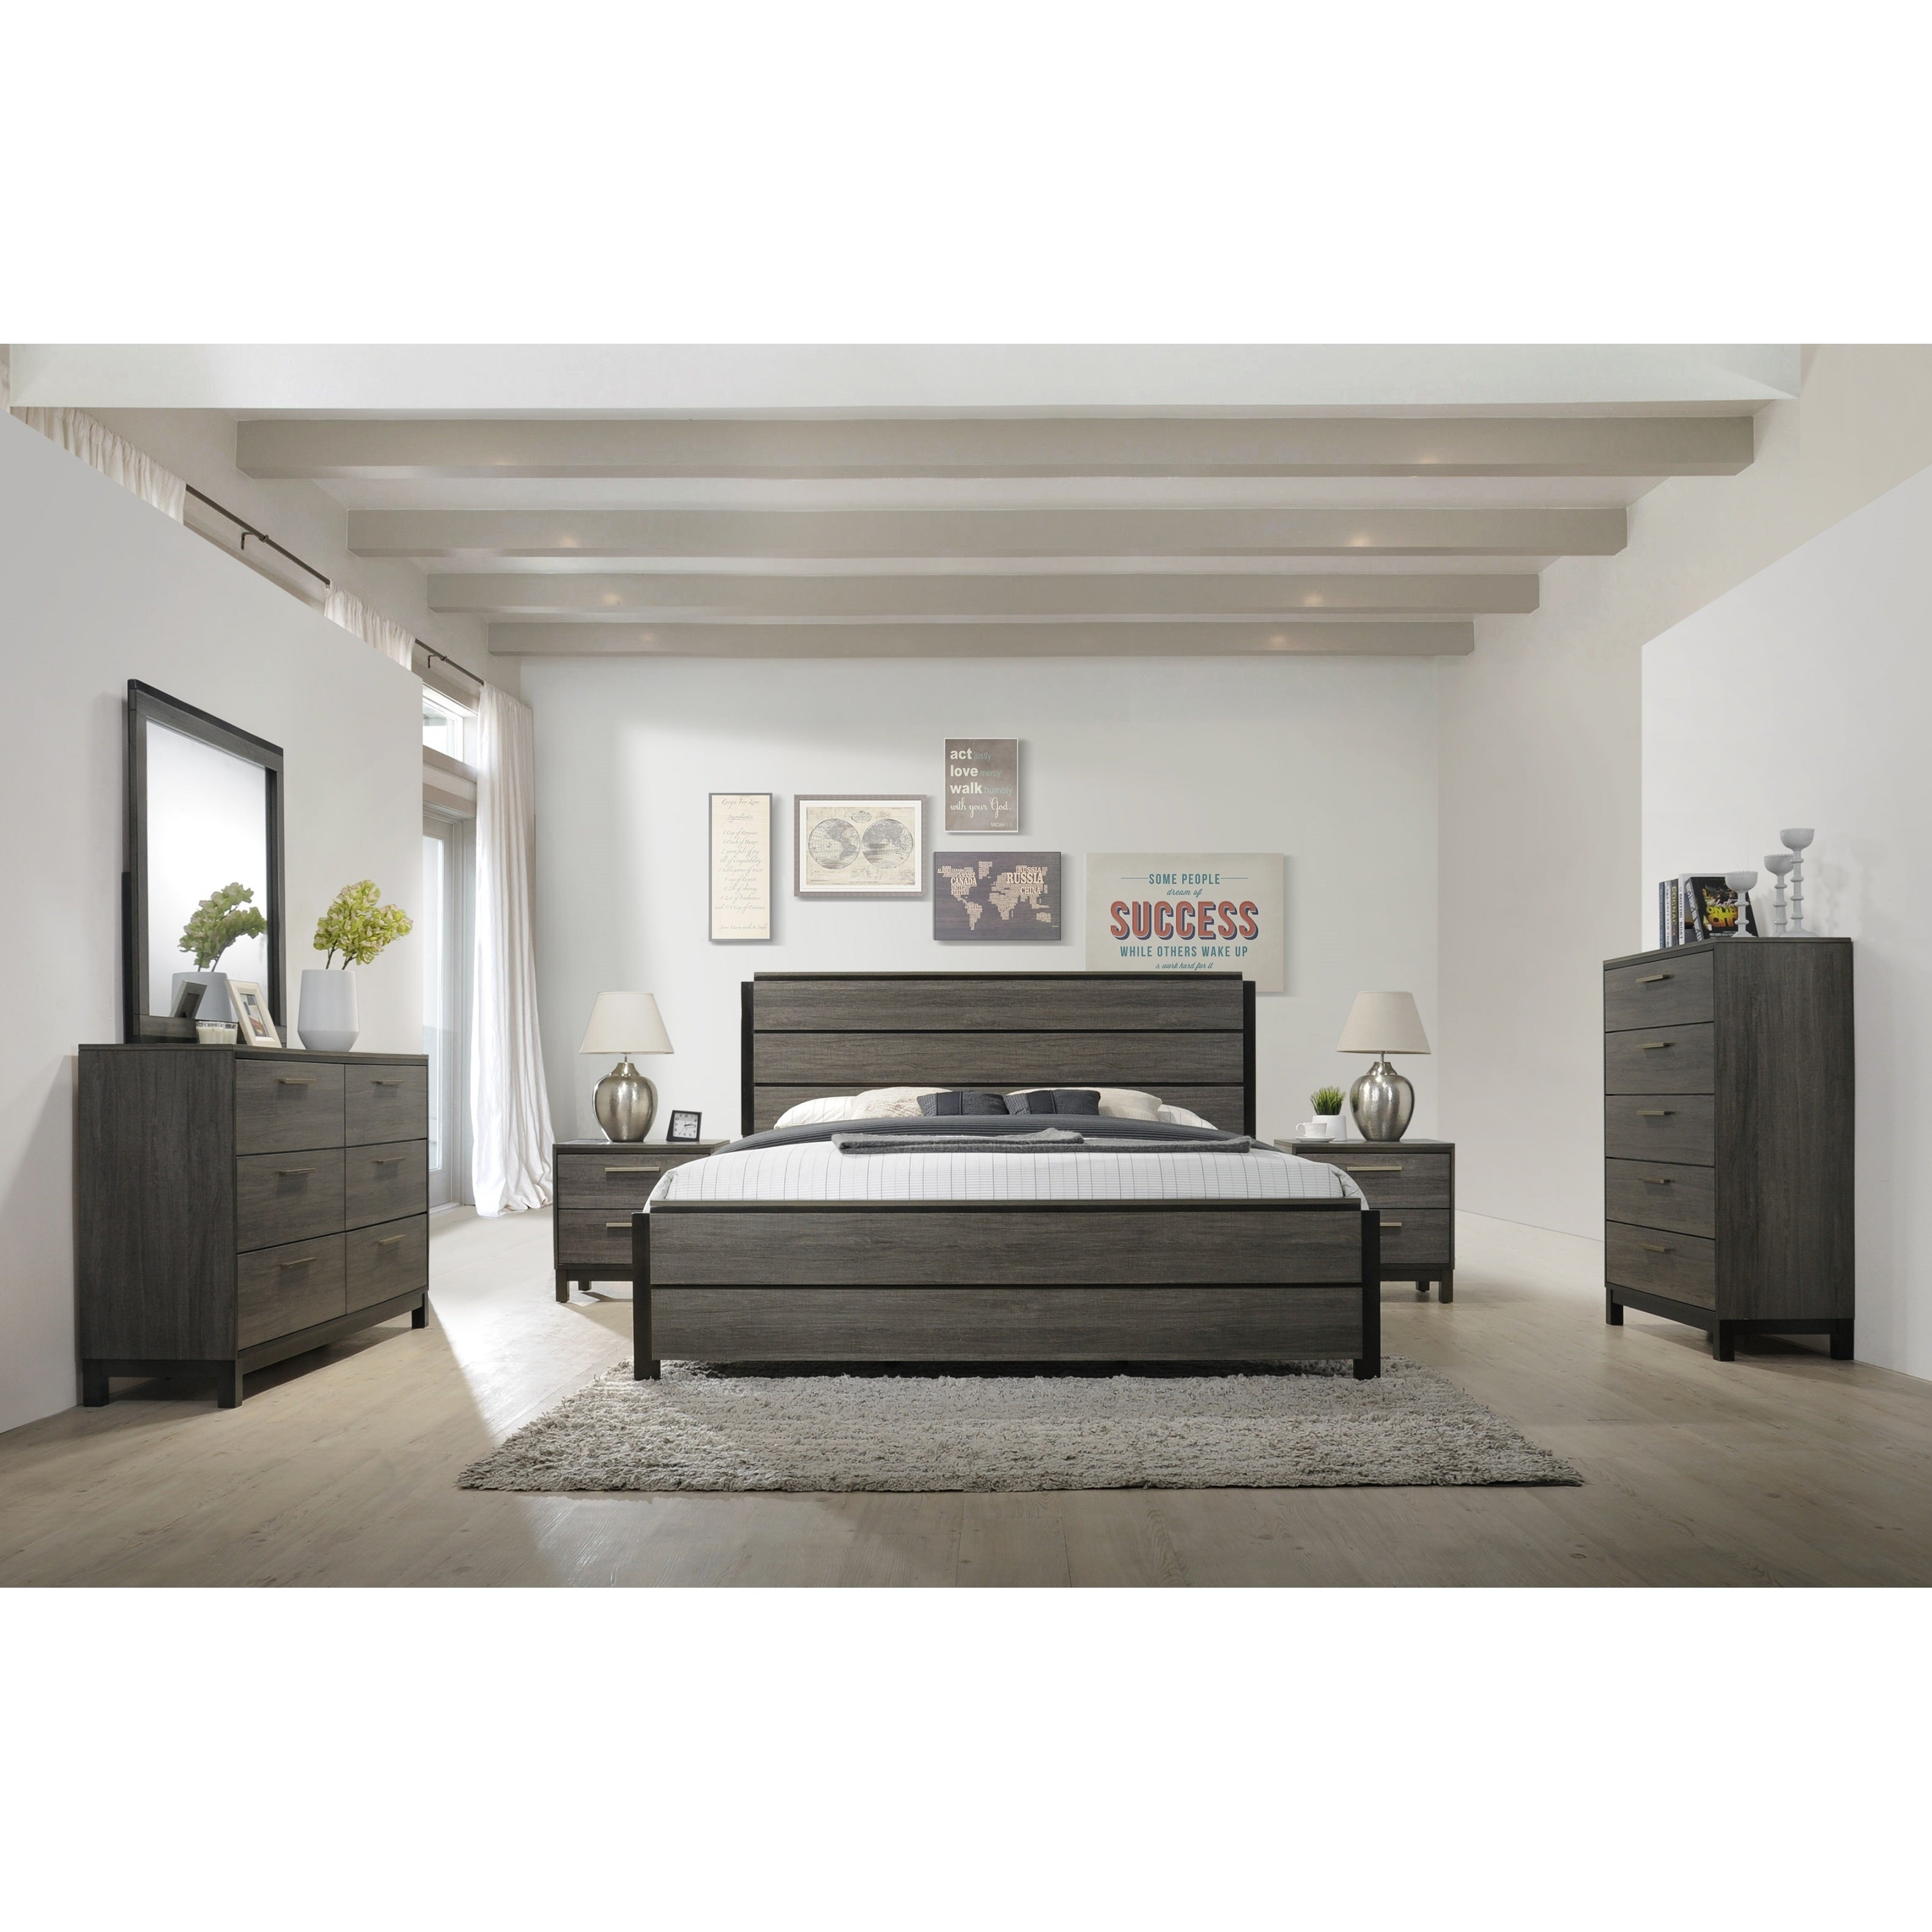 Ioana 187 Antique Grey Finish Wood Bed Room Set King Size Bed Dresser Mirror 2 Night Stands Chest within sizing 3159 X 3159